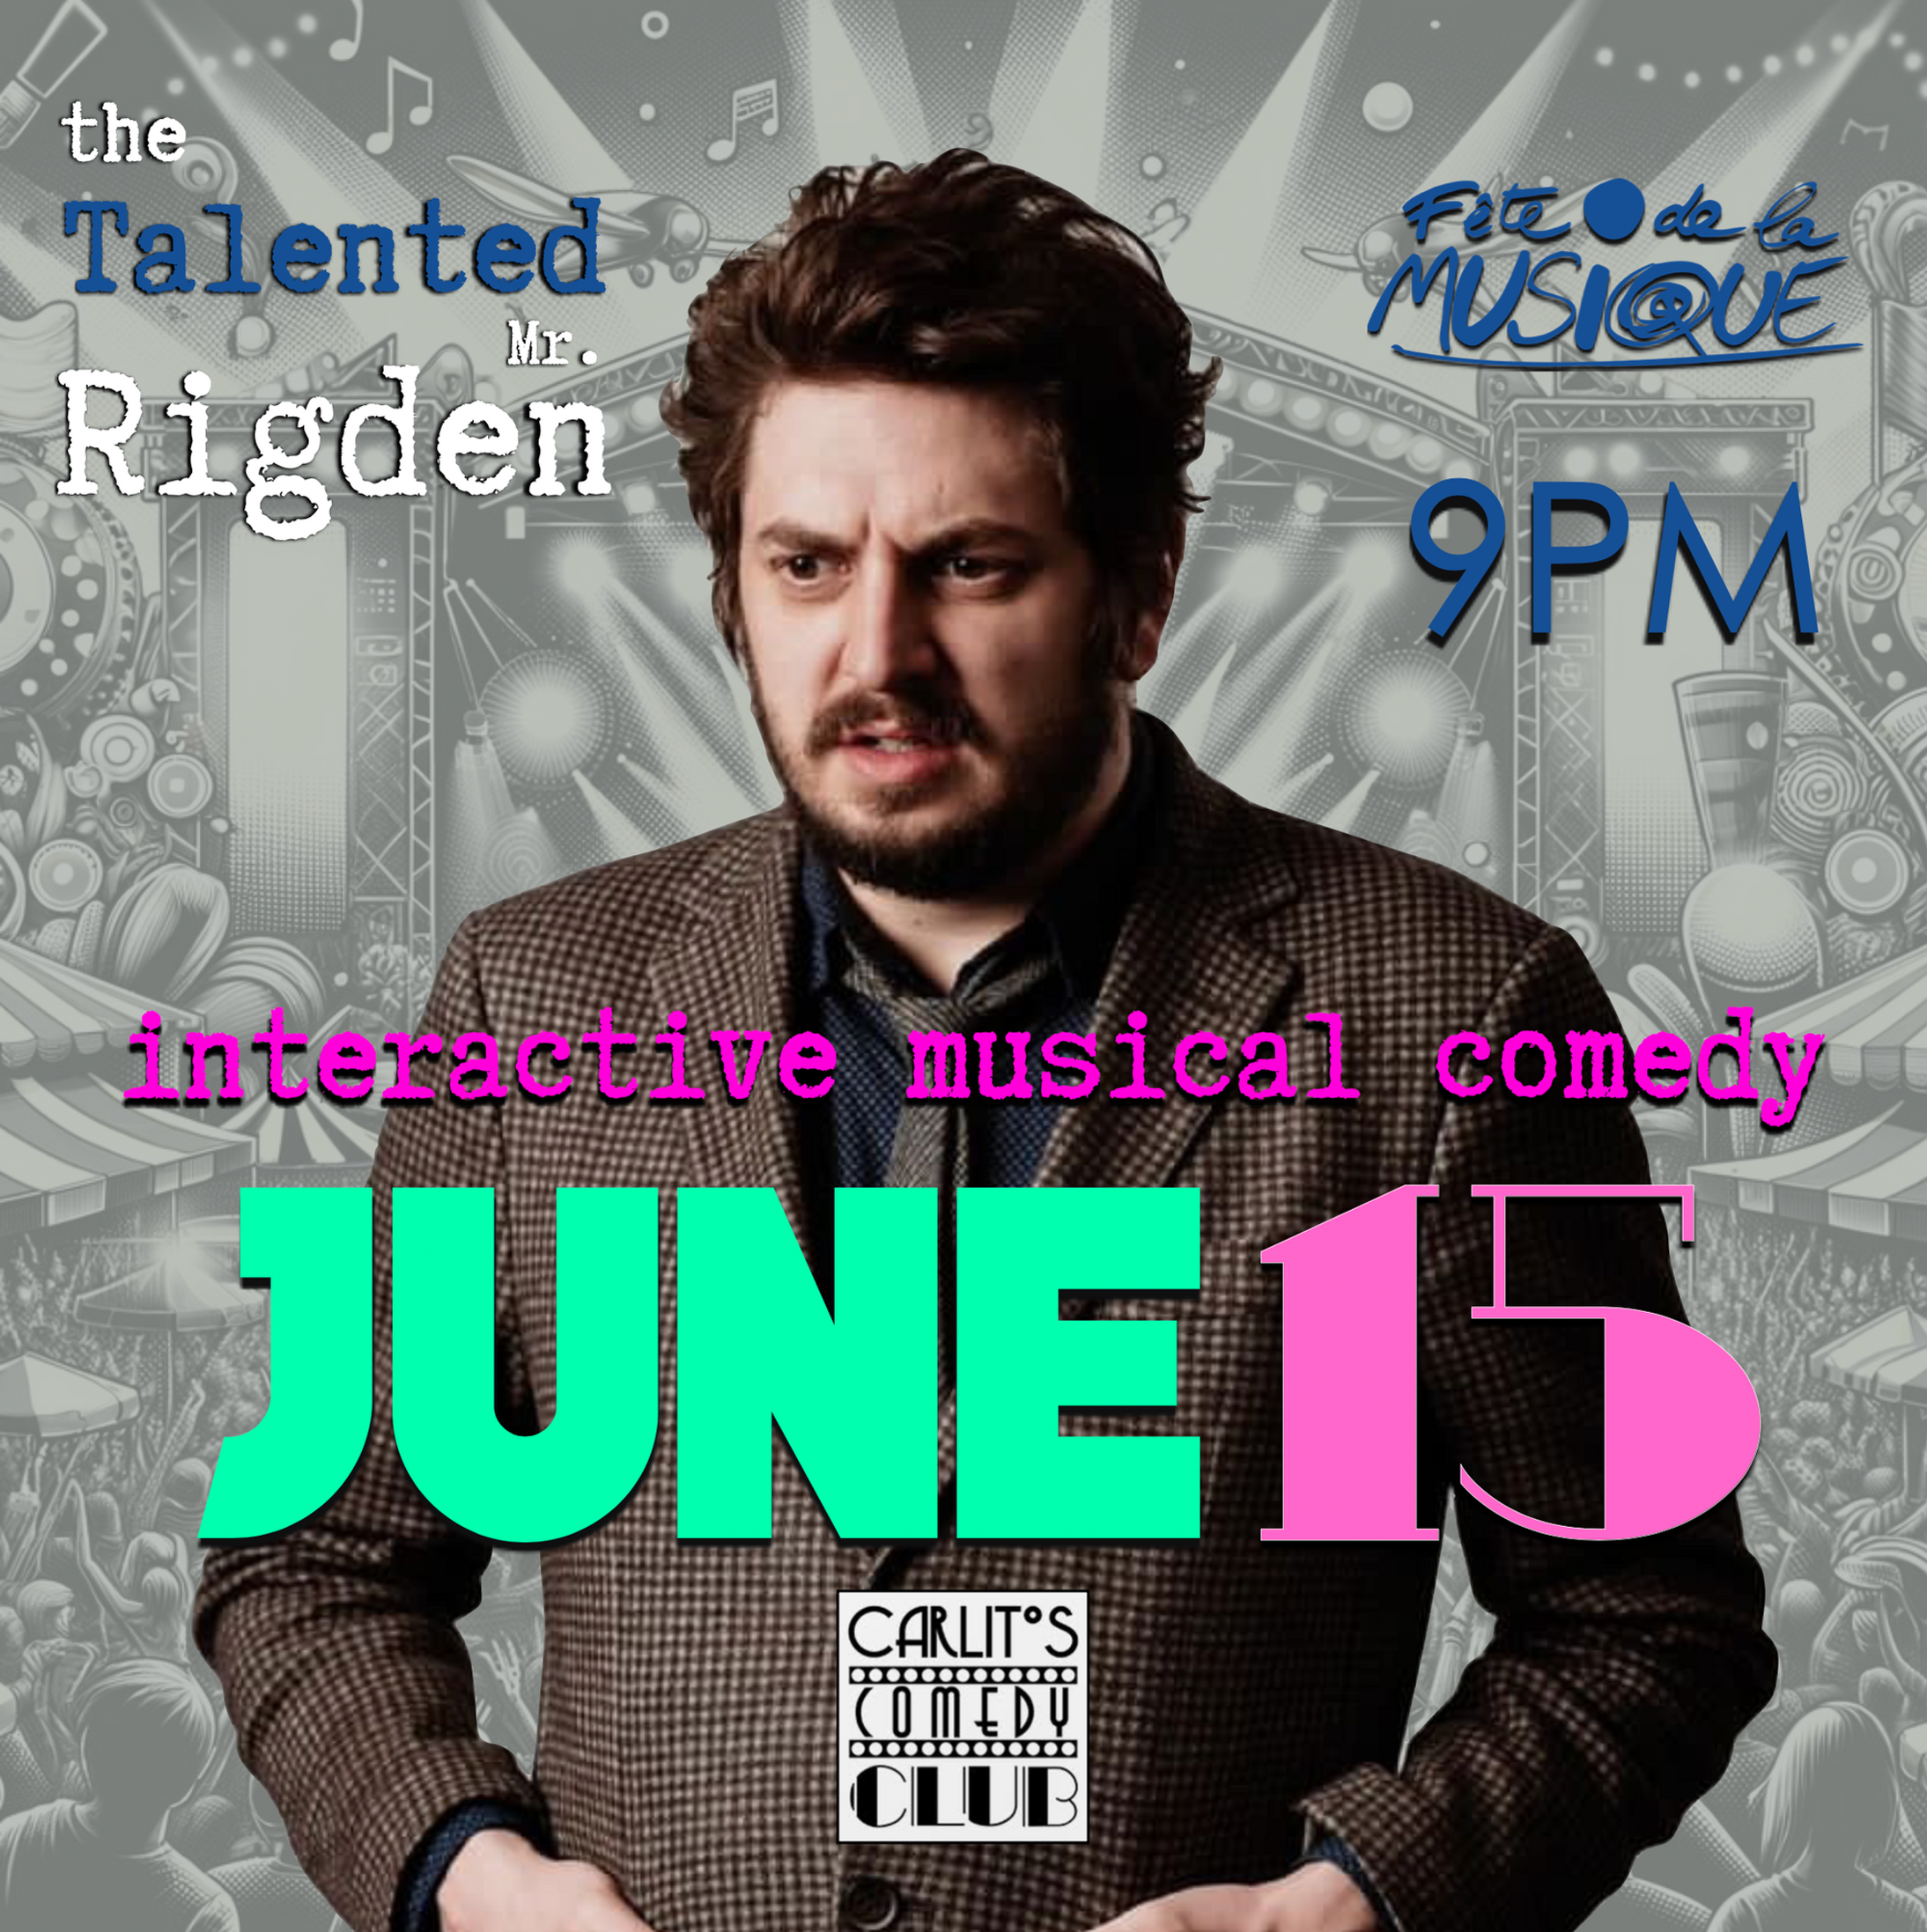 The Talented Mr. Rigden - Interactive Musical comedy